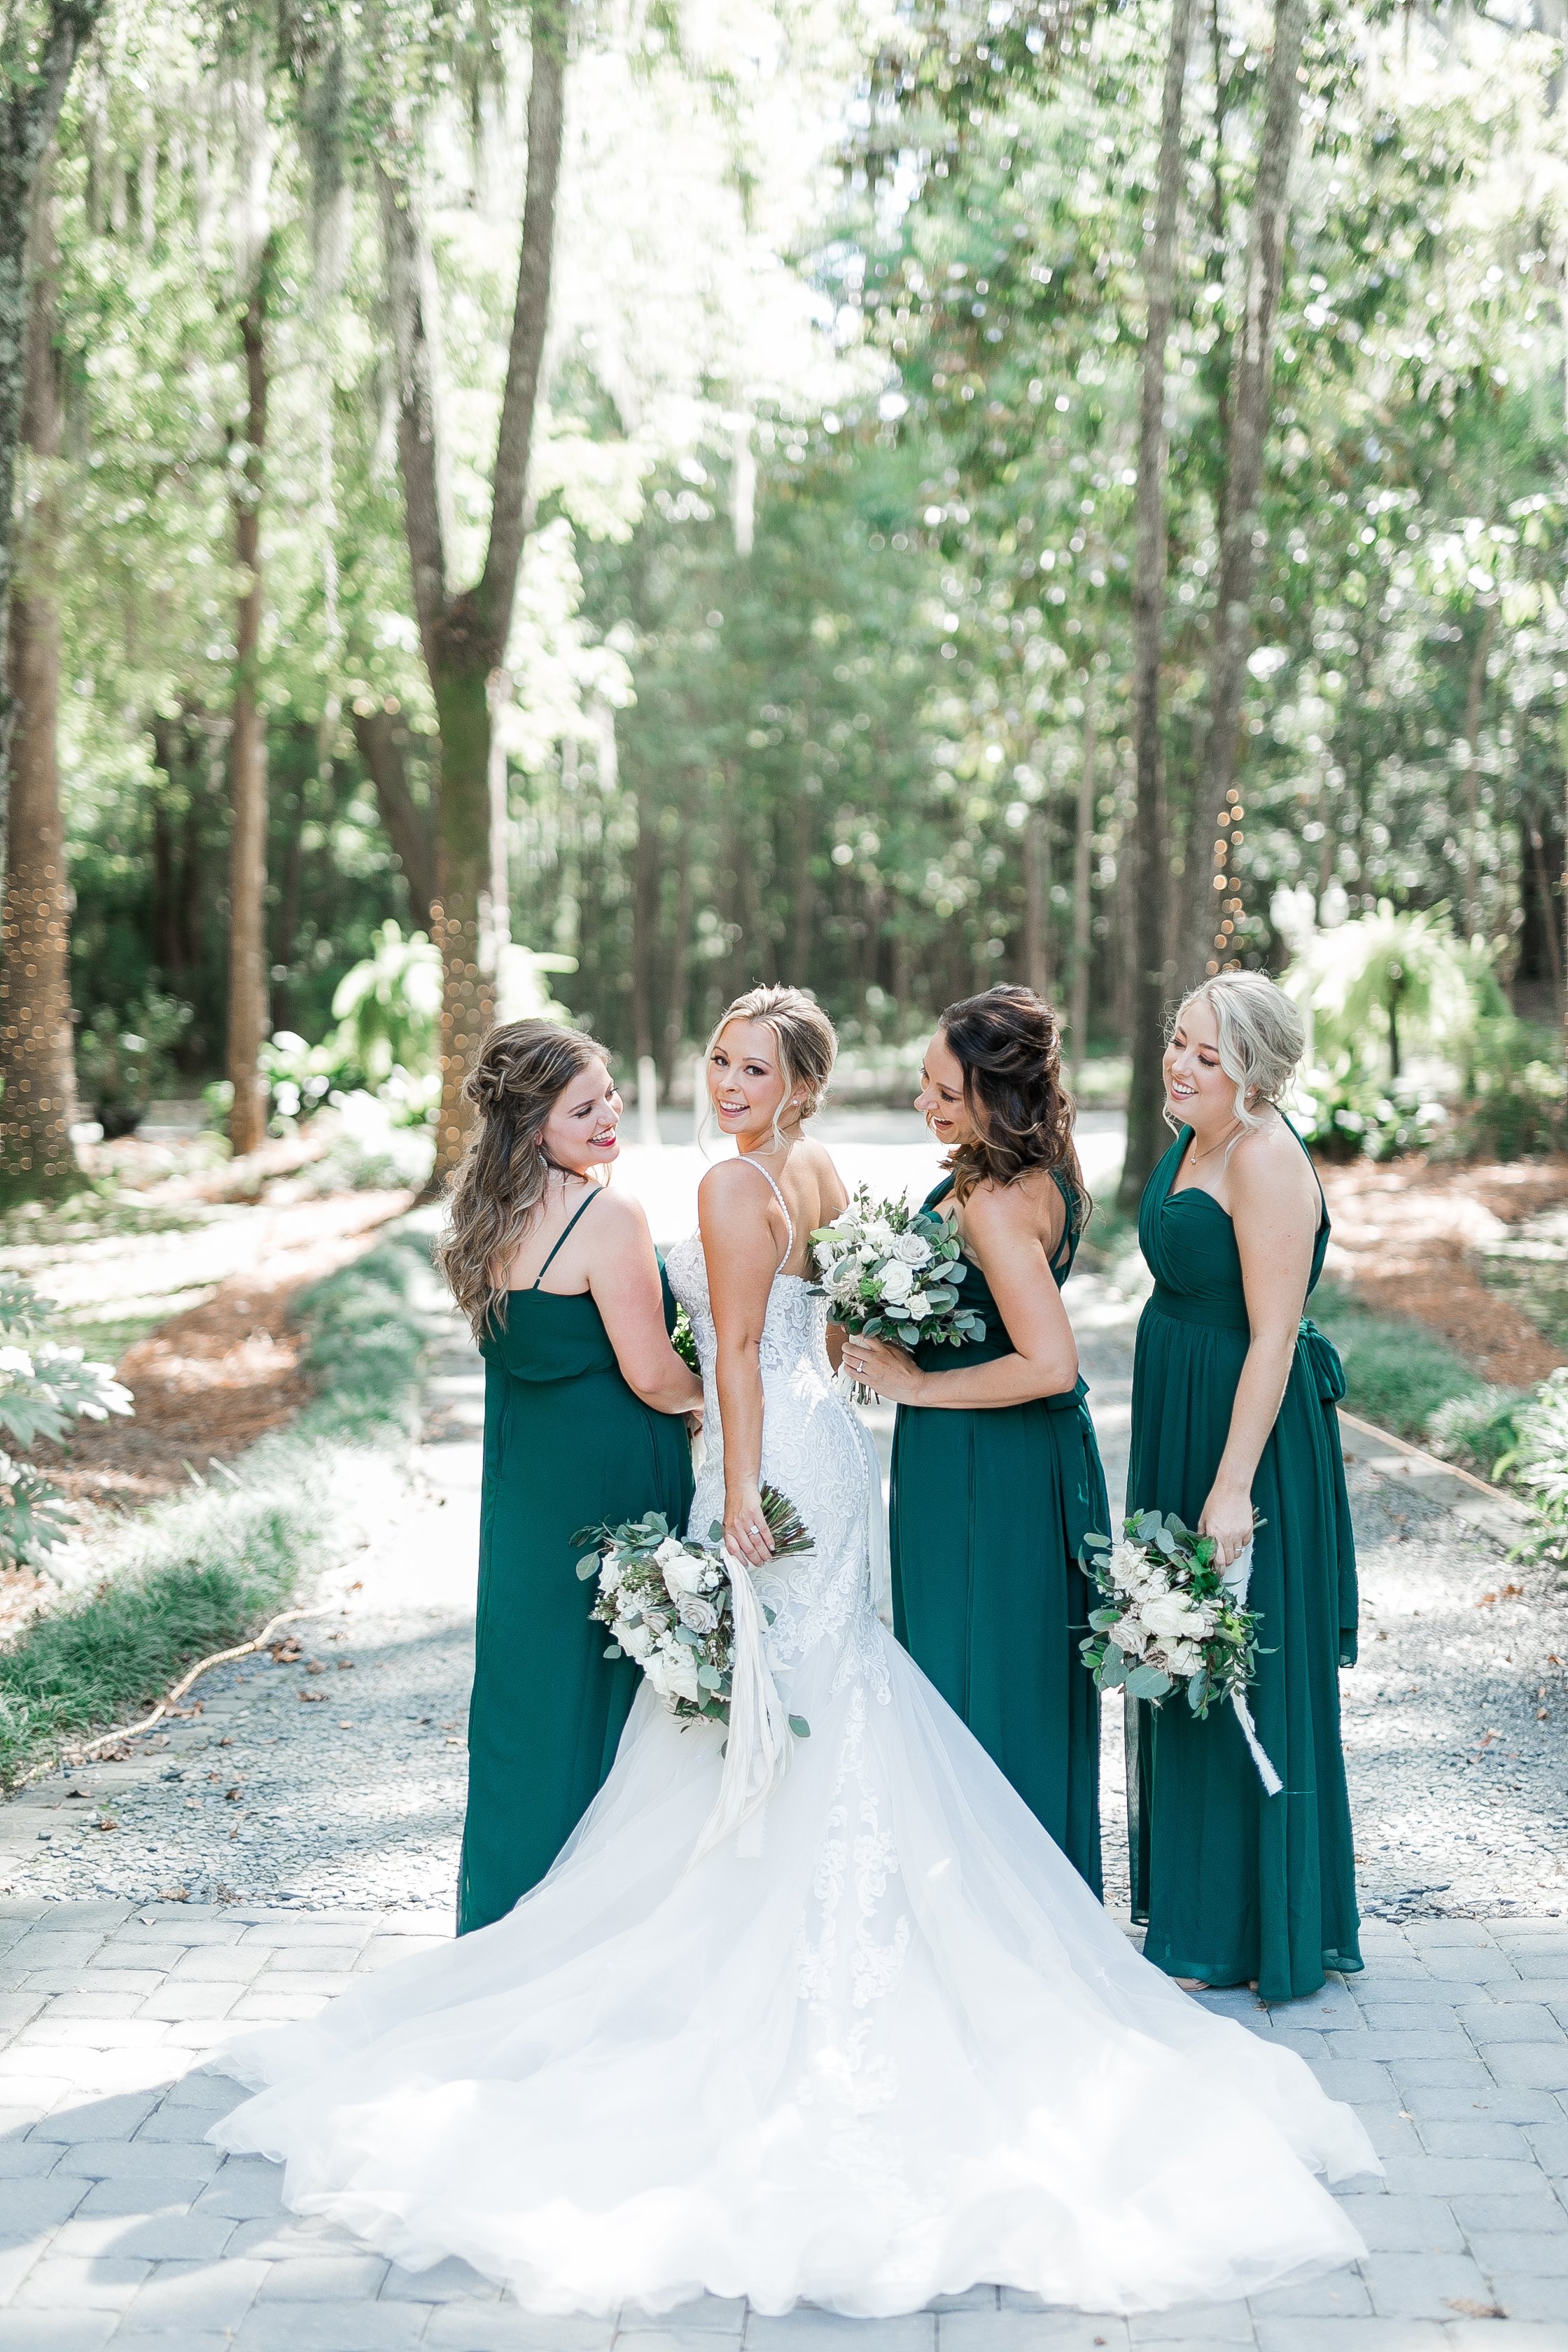 ivory-and-beau-bride-and-florals-wedding-blog-real-bride-real-wedding-savannah-wedding-southern-wedding-mackey-house-alistaire-maggie-sottero-wedding-dress-organic-natural-neutral-wedding-flowers-wedding-florist-savannah-Oct32021Wedding2097.JPG